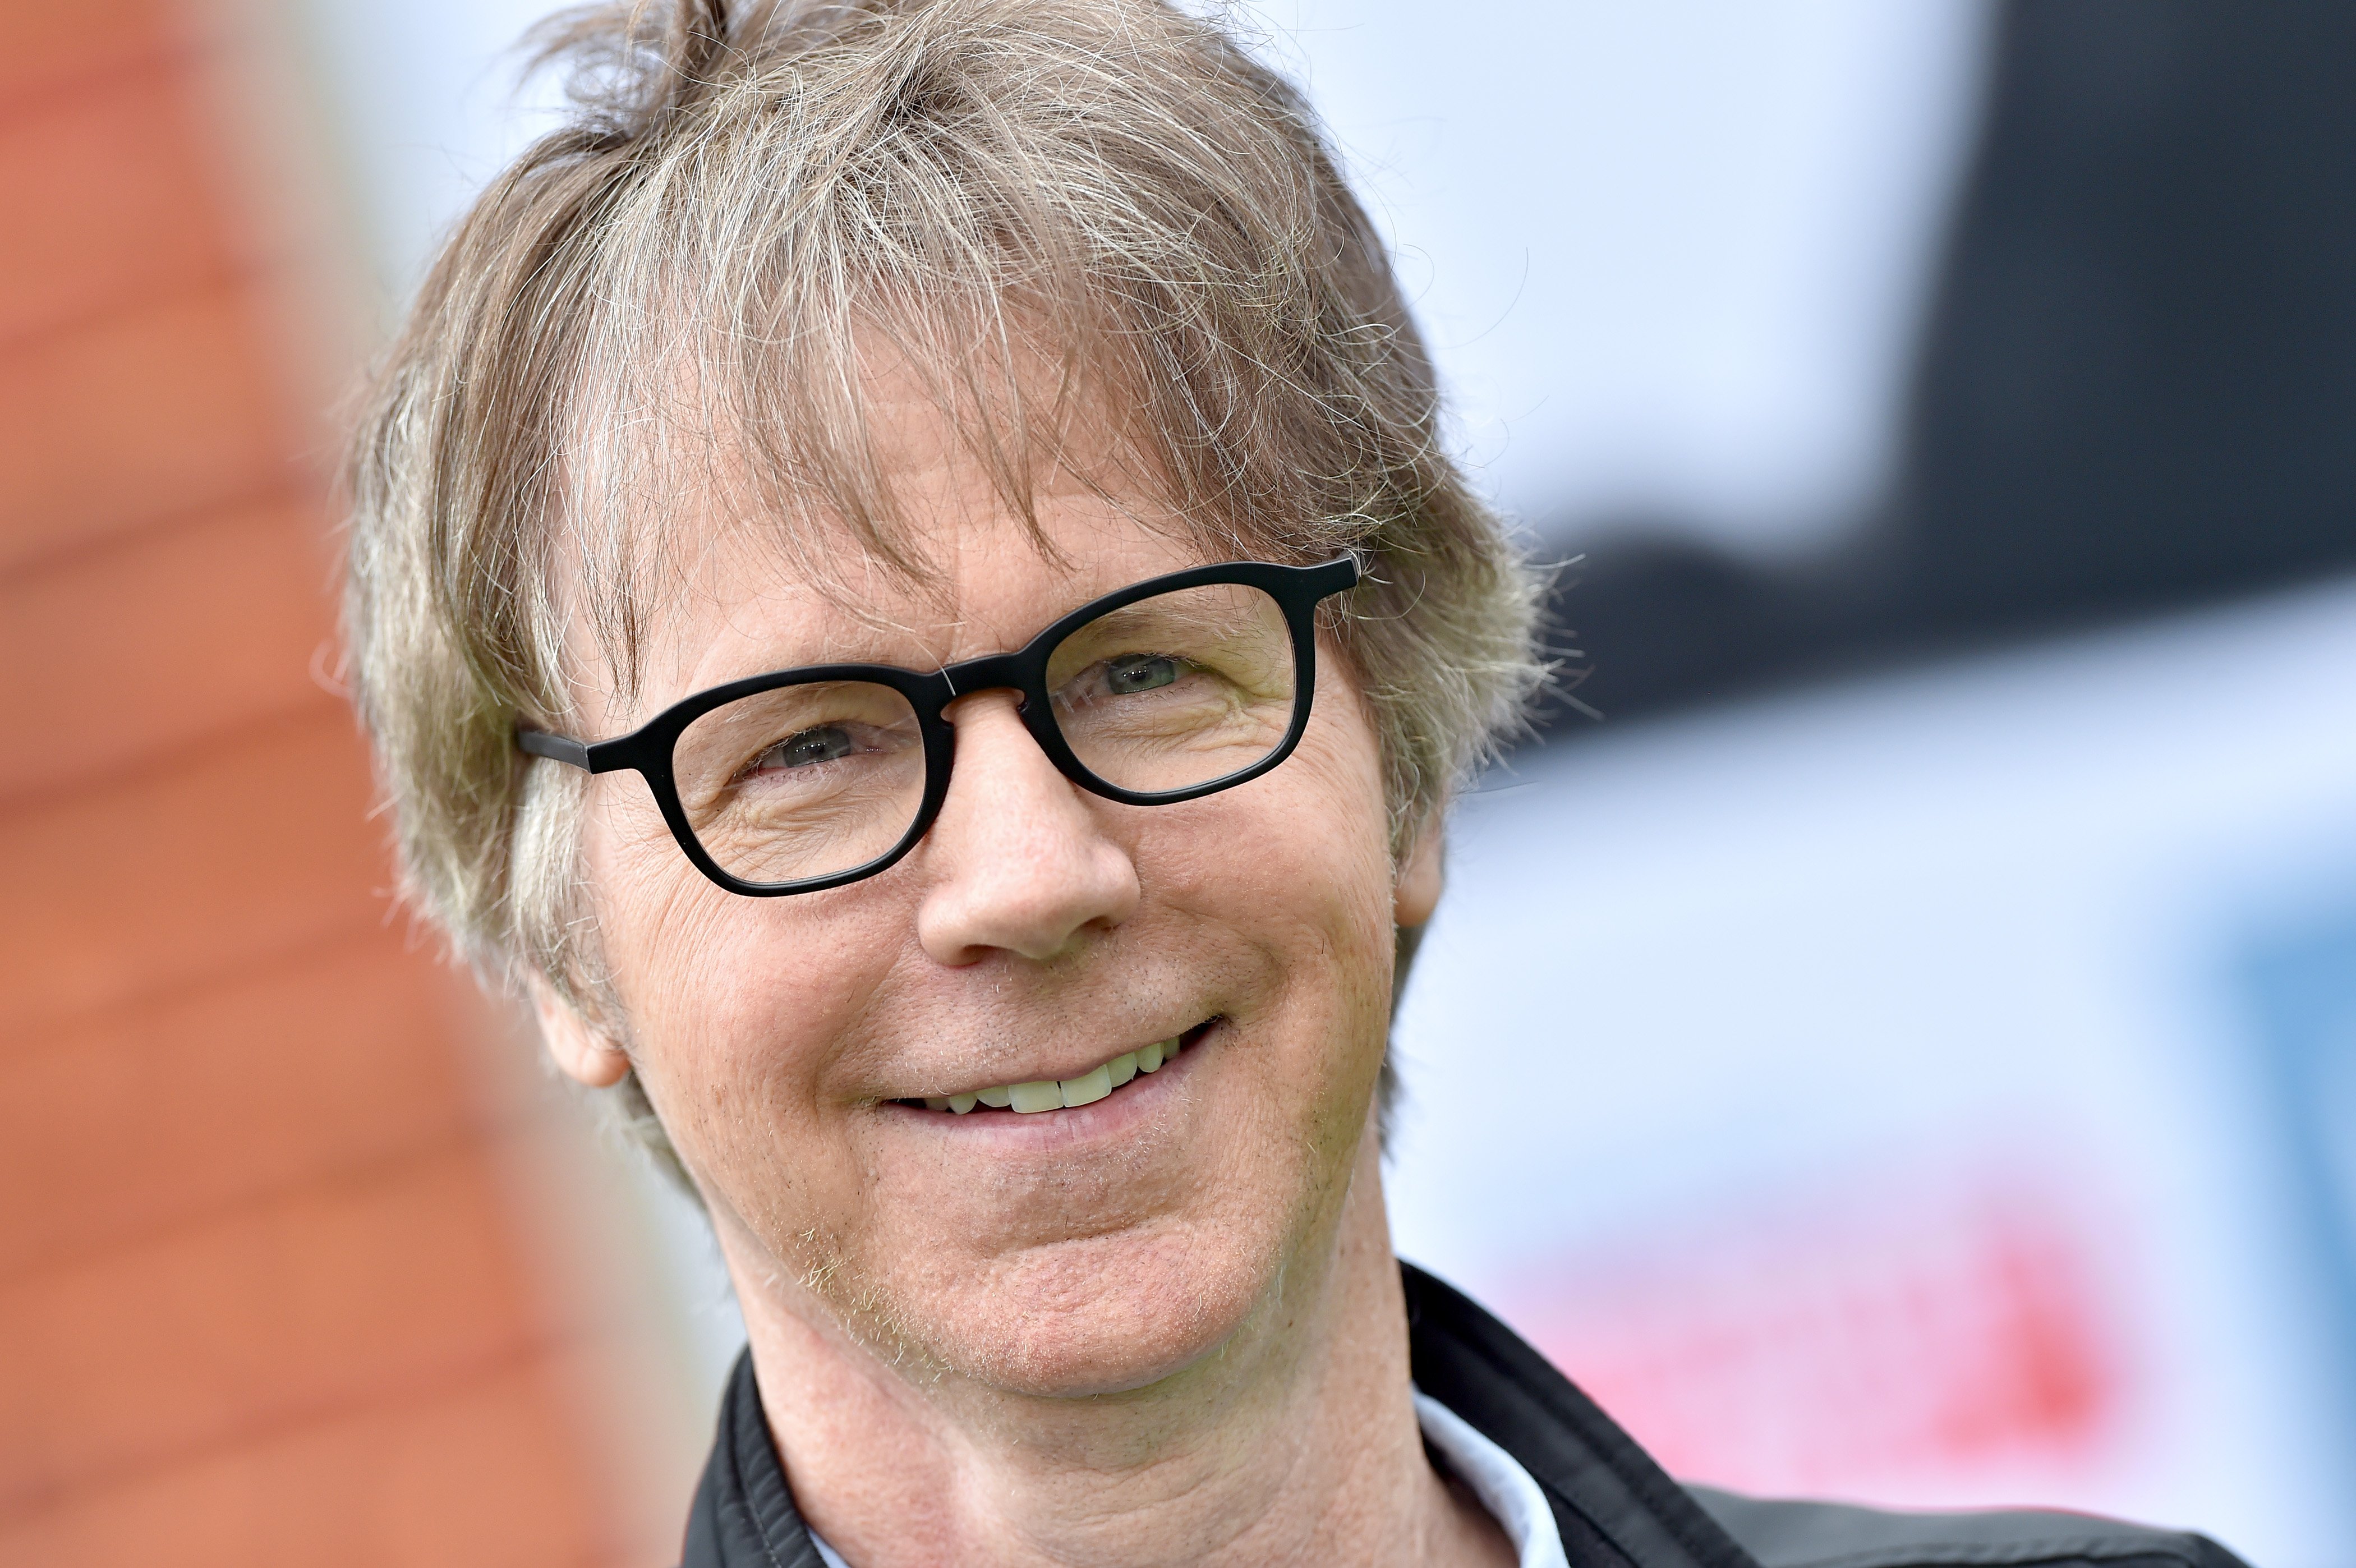 Dana Carvey attends the premiere of Universal Pictures' "The Secret Life of Pets 2" at Regency Village Theatre on June 02, 2019 in Westwood, California. 